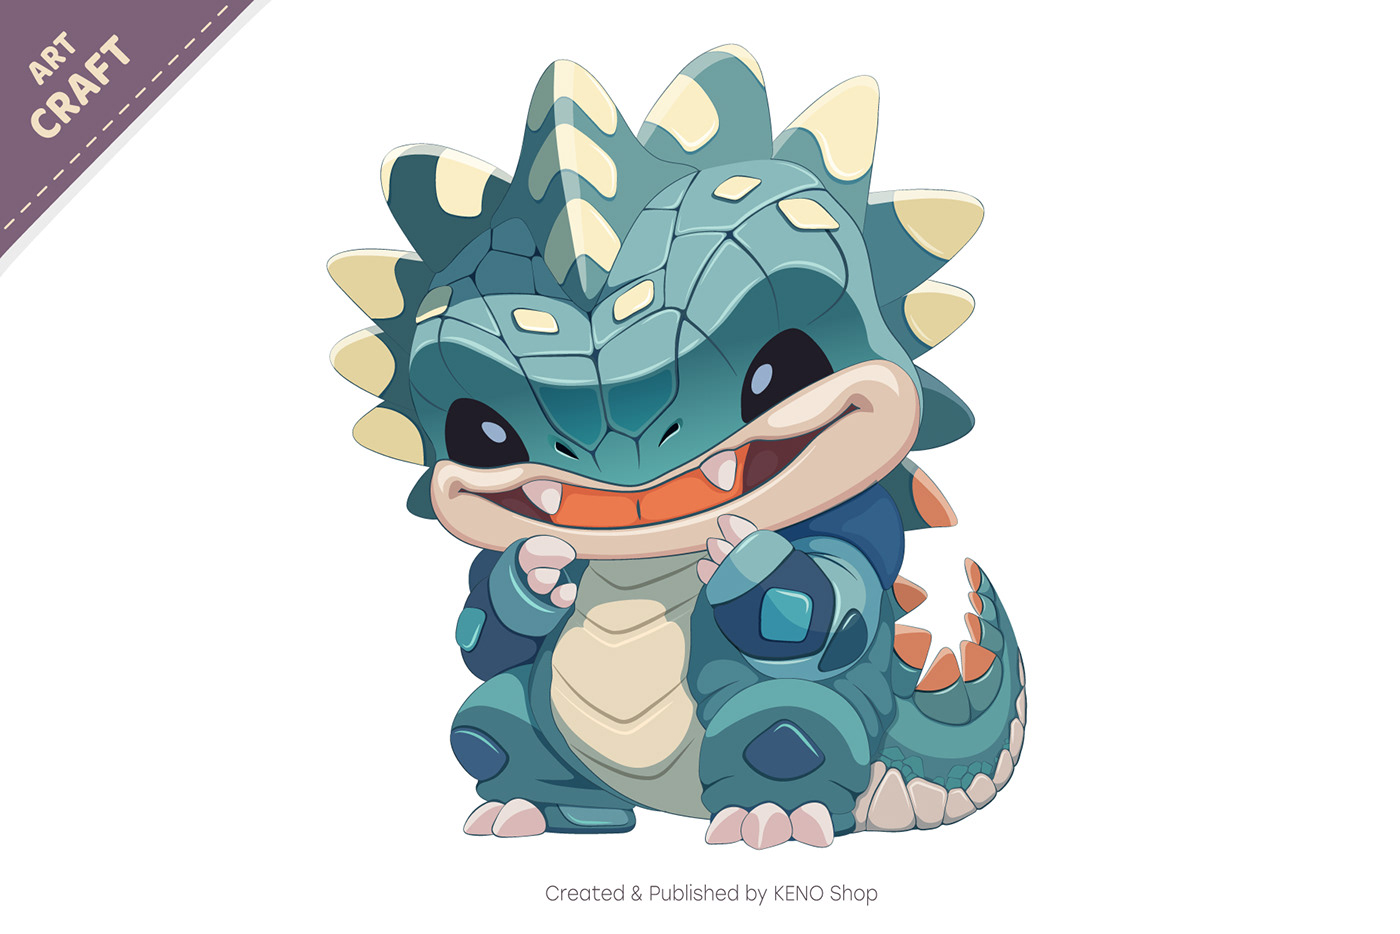 Cute cartoon illustration of a smiling spiky dino.